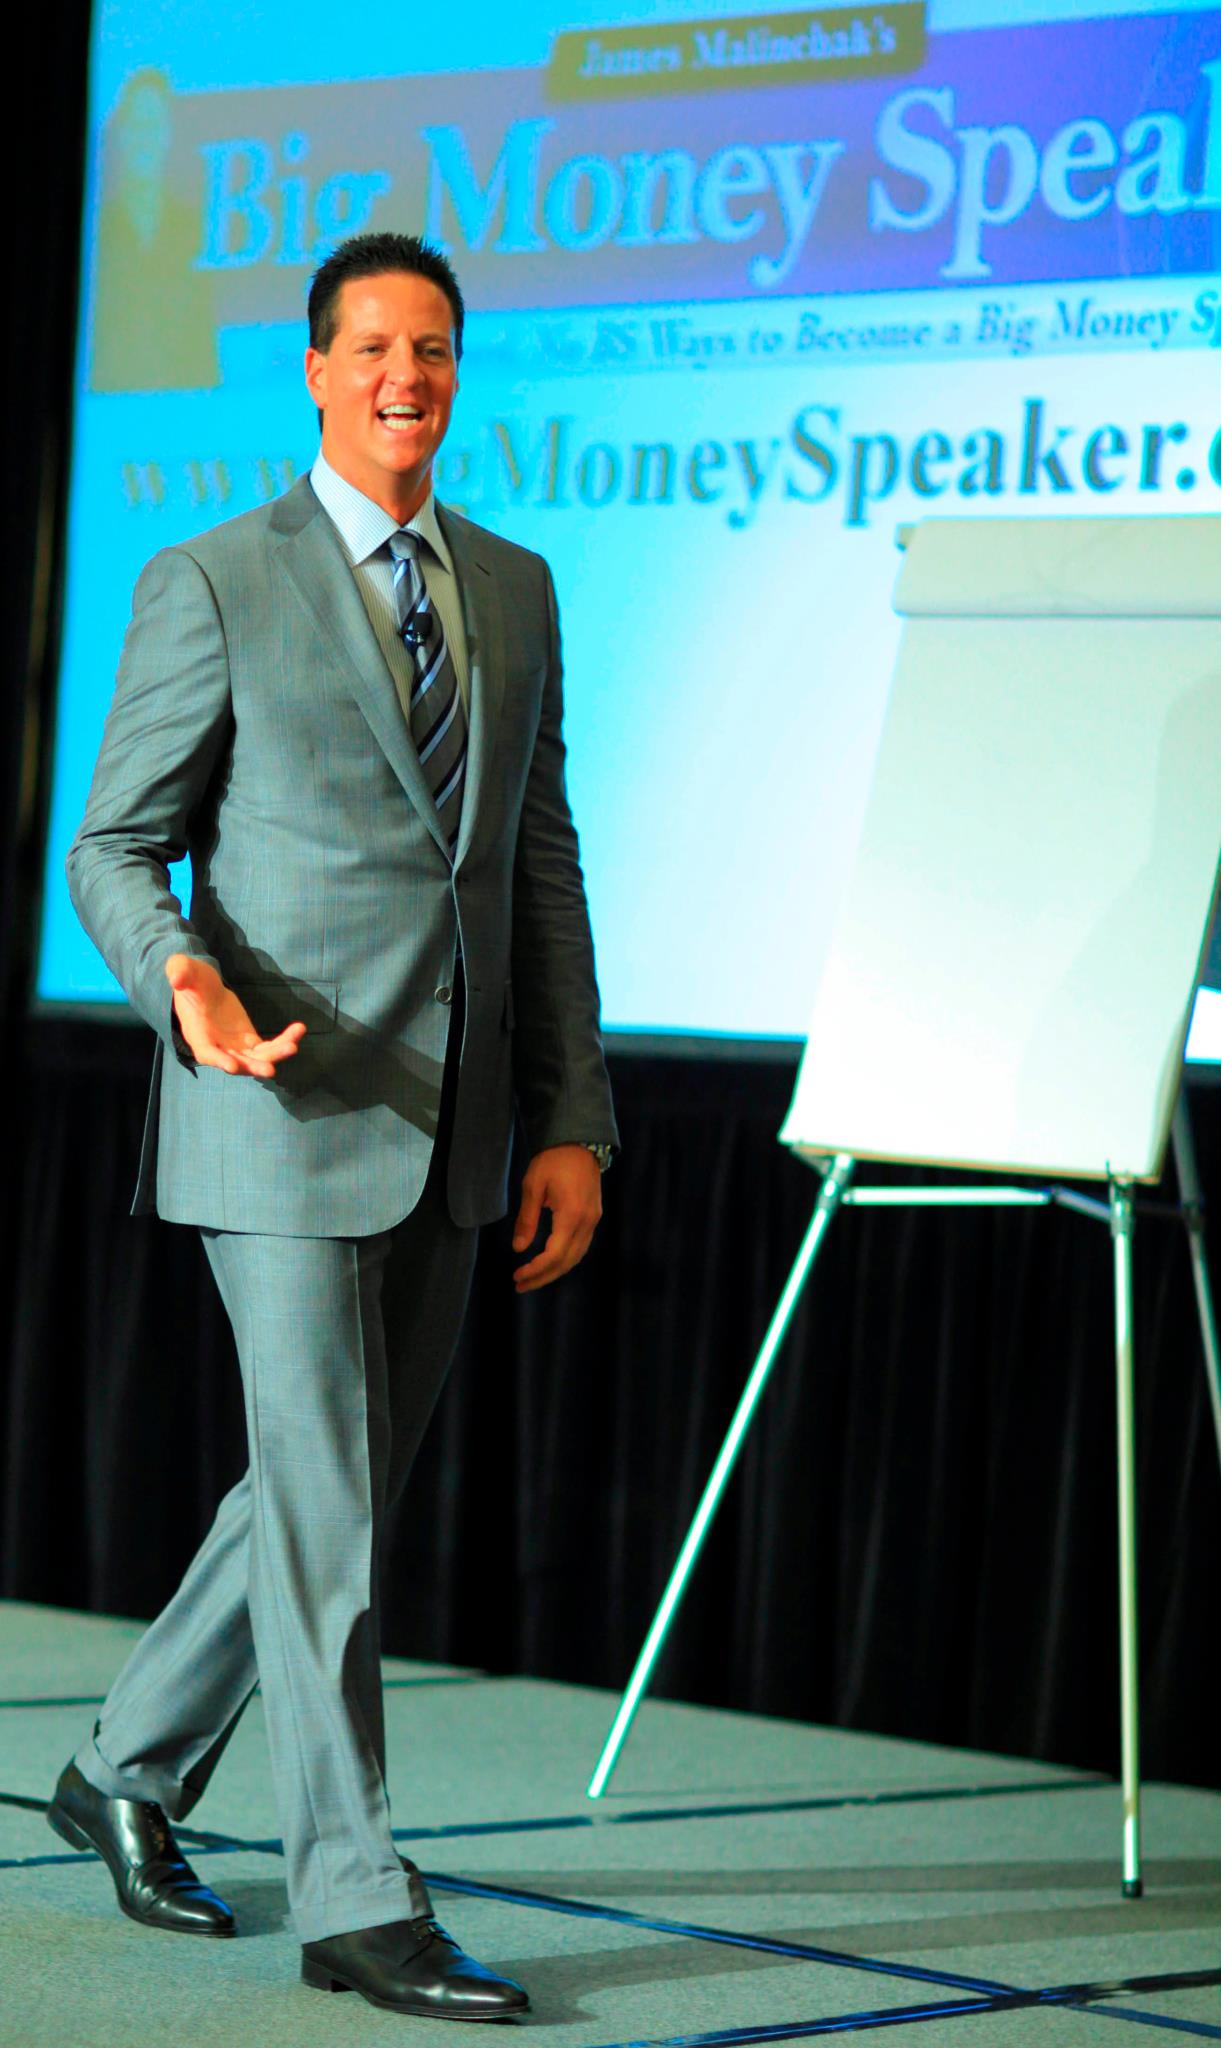 Business Motivational Speaker James Malinchak, Featured on ABC's Hit TV Show, Secret Millionaire, is one of America's highest-paid, most in-demand speakers & teaches anyone how to get highly paid as a speaker, author & coach.